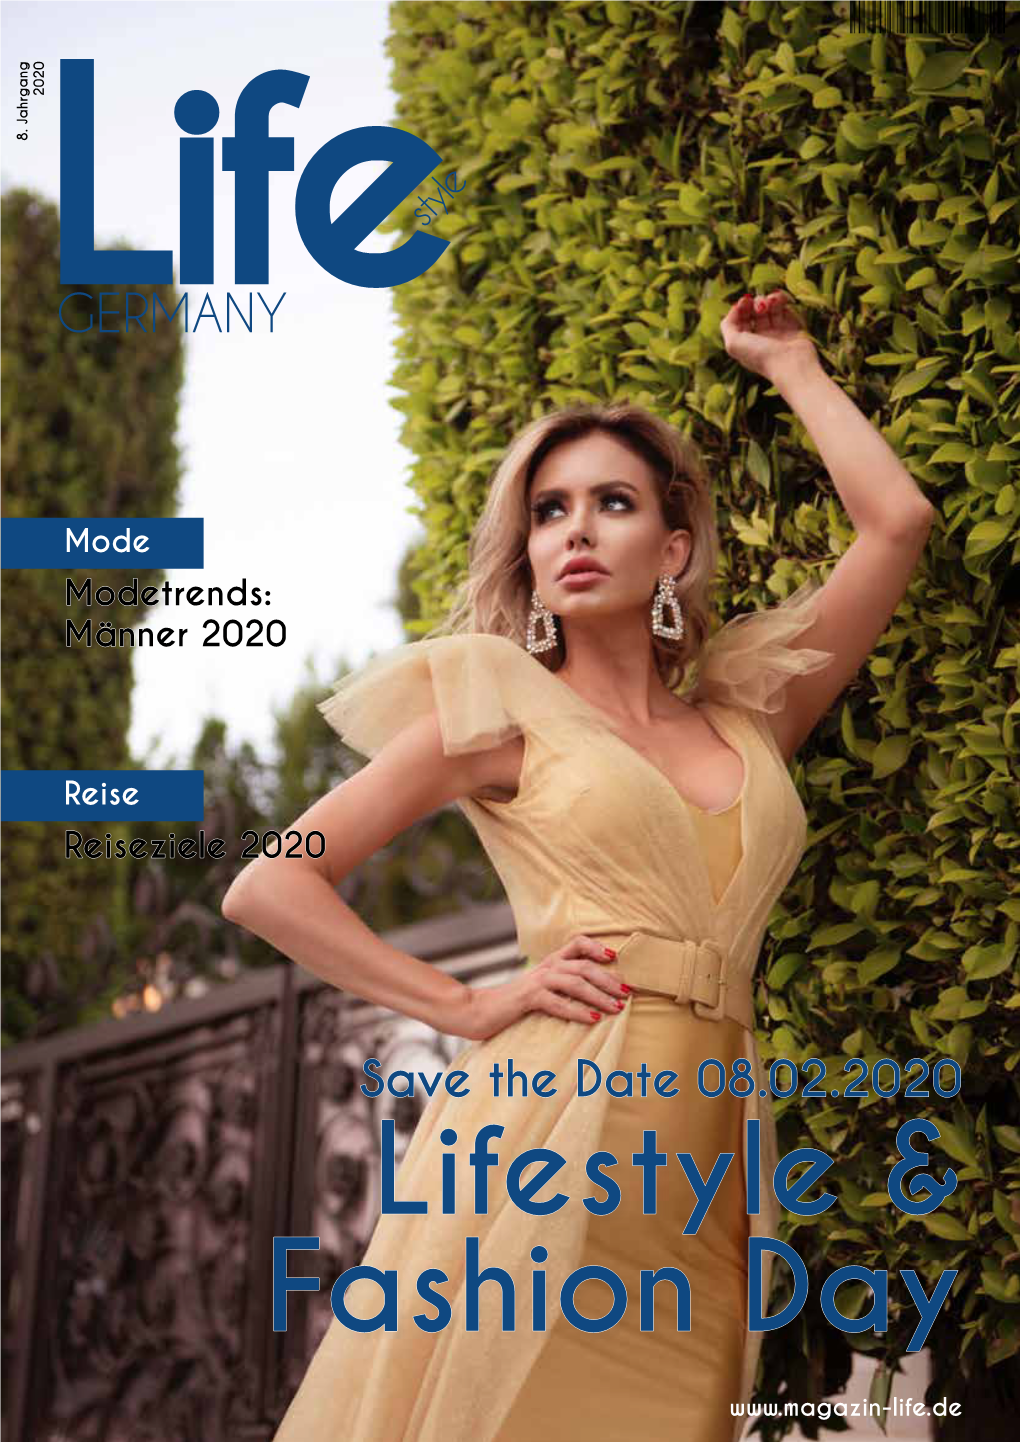 Save the Date 08.02.2020 Lifestyle & Fashion Day